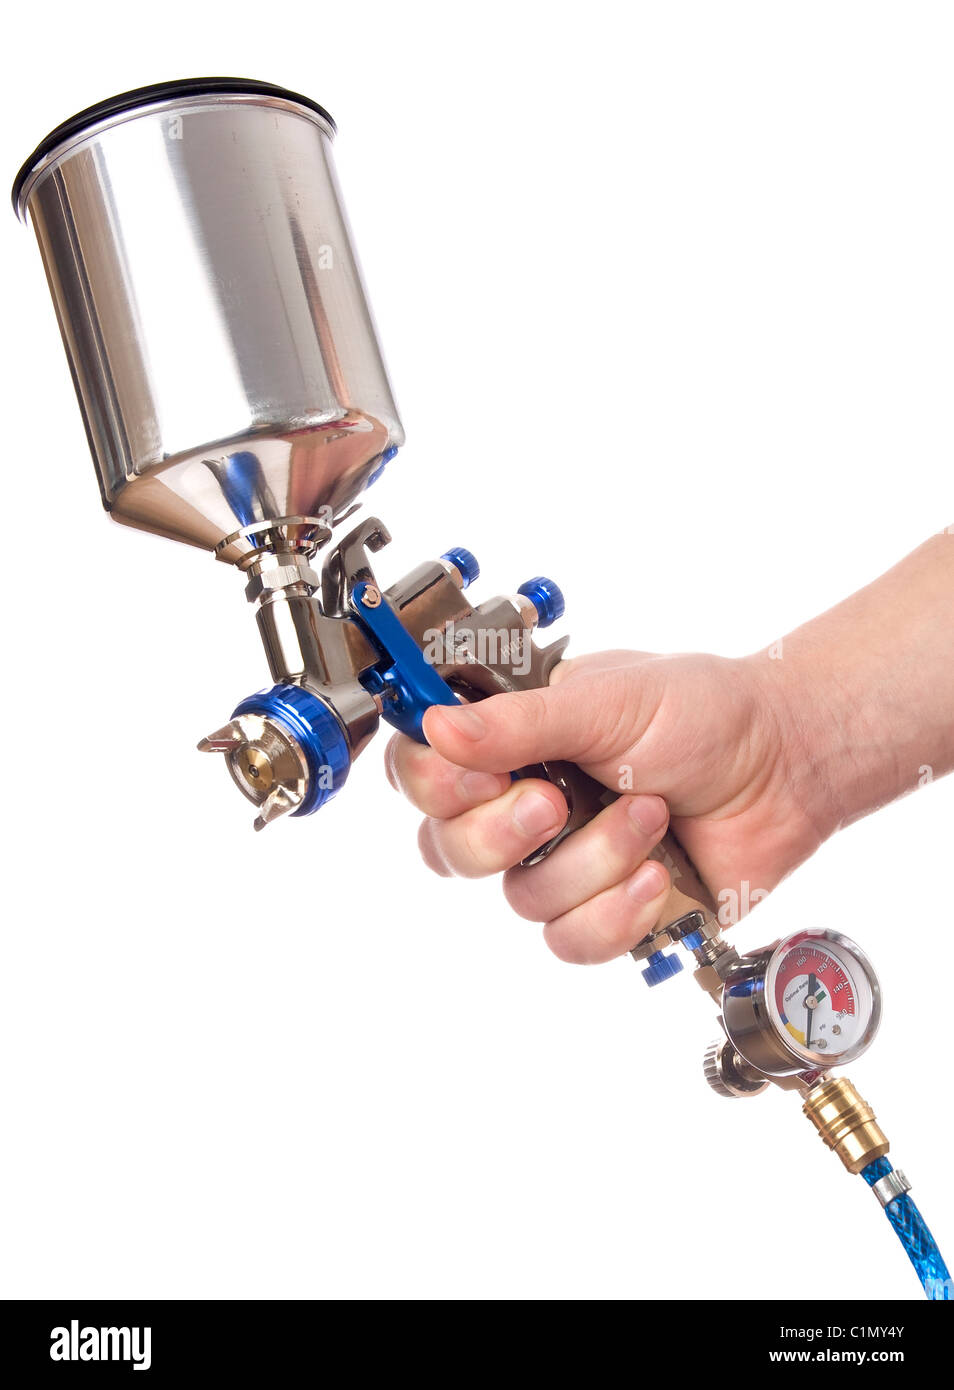 A Spray Gun For Painting Works In The Hand Of A Master Stock Photo, Picture  and Royalty Free Image. Image 190759843.